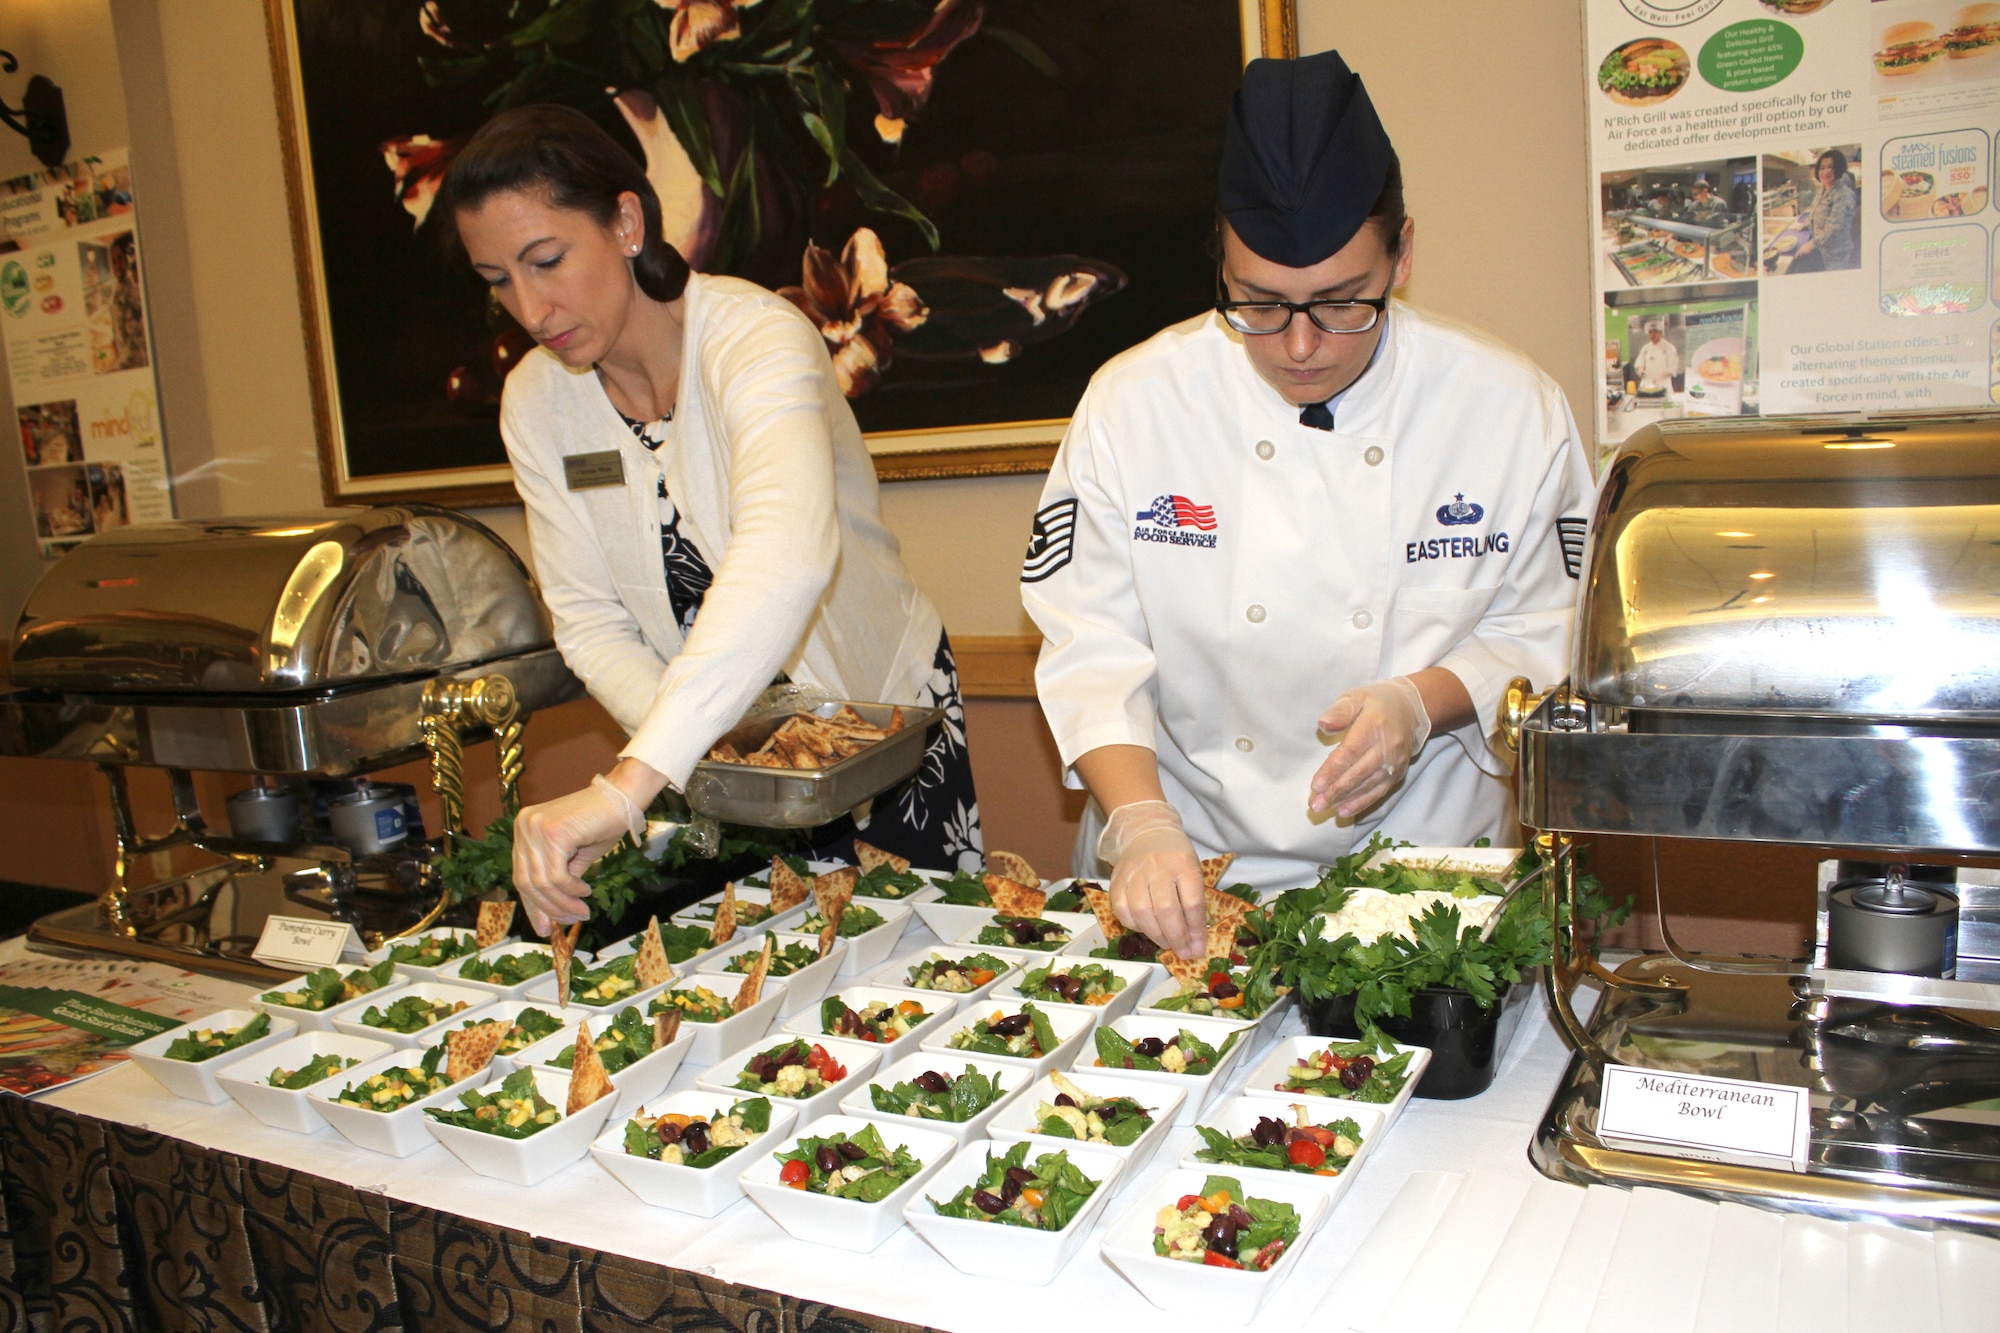 Christie Maas and Tech. Sgt. Audrey Easterling, food and beverage managers at the Air Force Services Activity, put the finishing touches on pumpkin curry and Mediterranean bowls for a Healthy Food Initiative lunch during the General Officer and Senior Executive Service Summit April 10, 2019, at Joint Base San Antonio-Lackland. AFSVA prepared various healthy and nutritious food items to familiarize summit attendees with HFI, a dining concept being rolled out across the Air Force. (U.S. Air Force photo by Debbie Aragon)